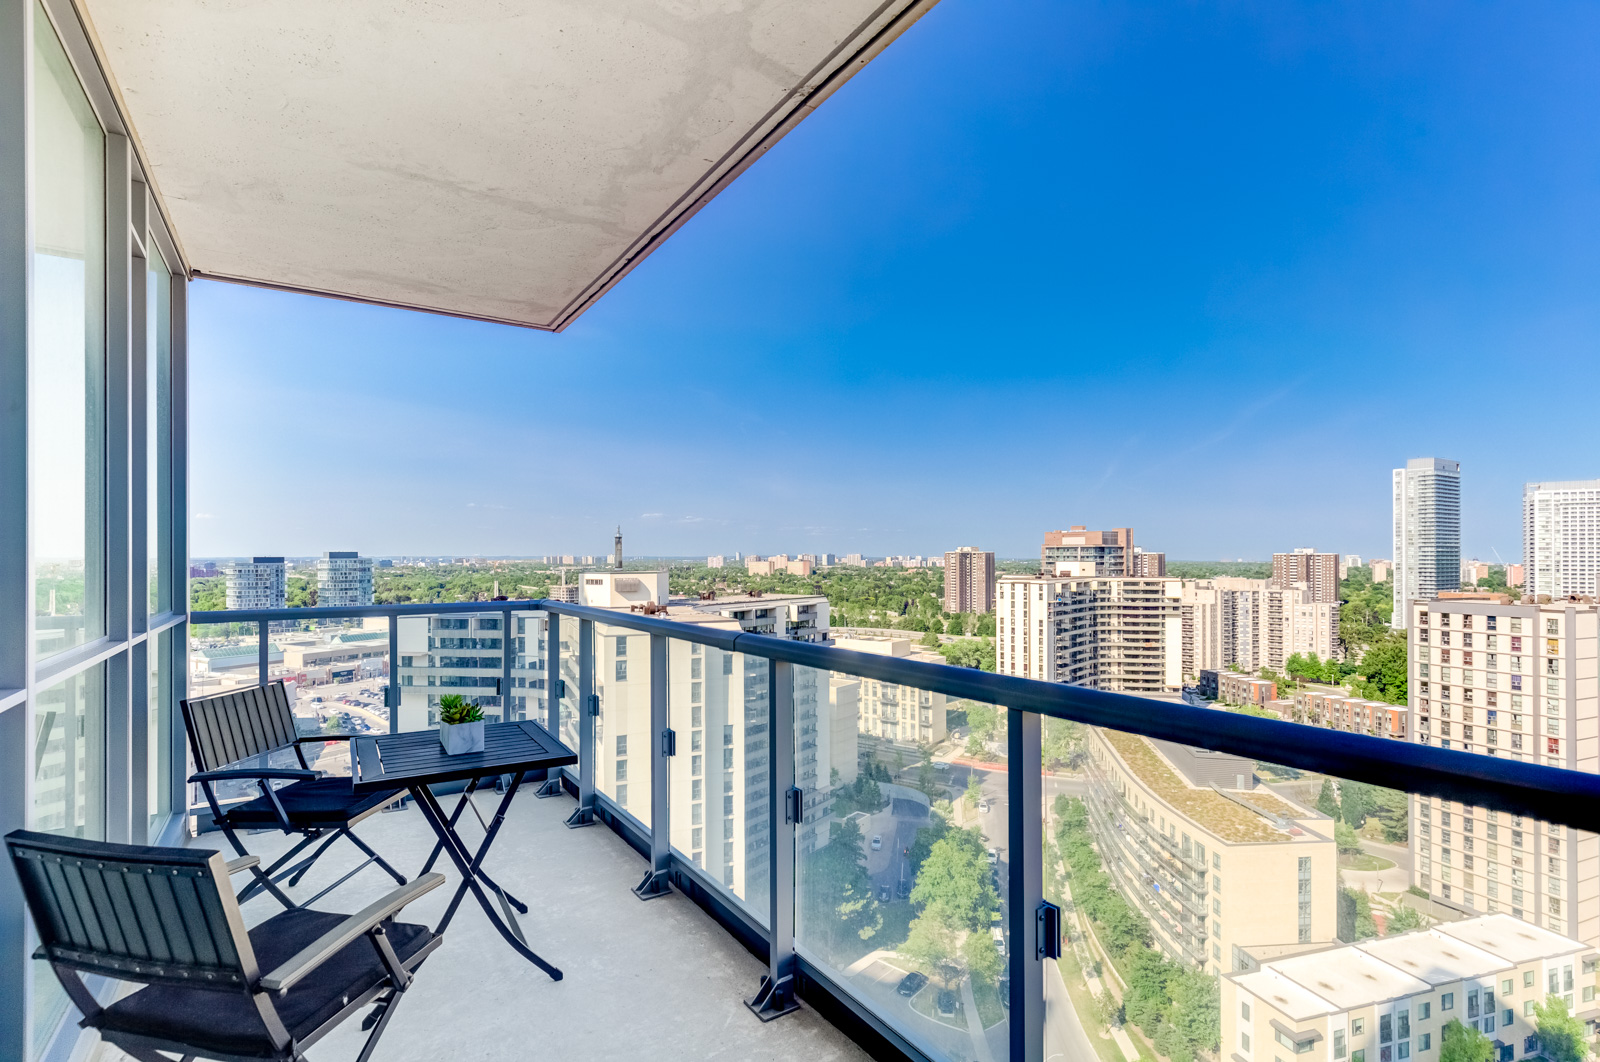 Glass paneled balcony with coffee table and chairs and view of North York, Toronto.